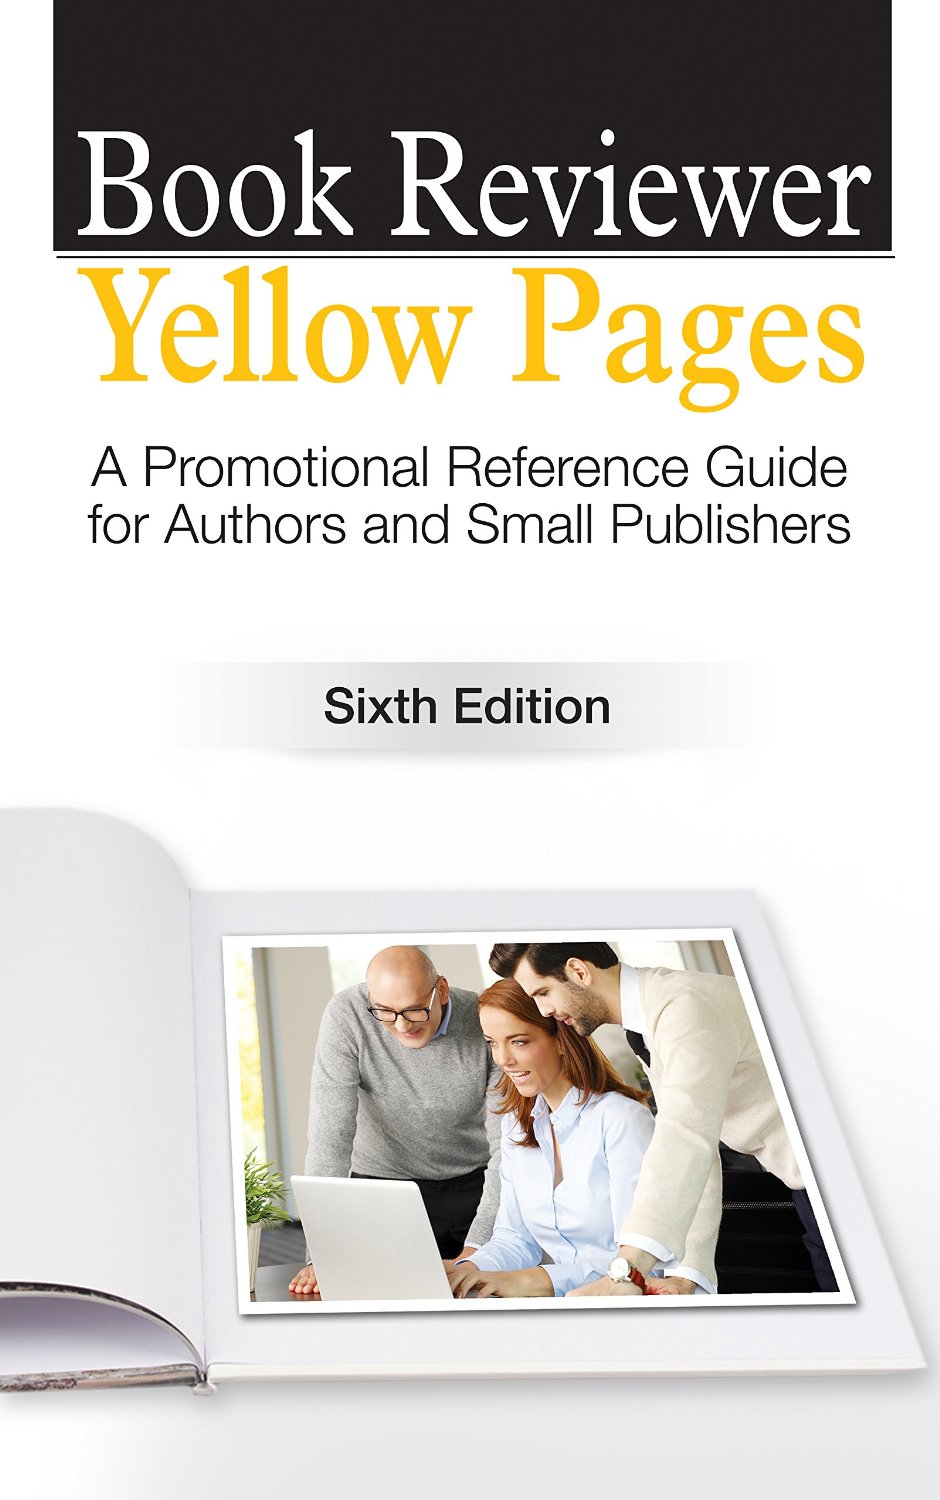 Book Review – The Book Reviewer Yellow Pages